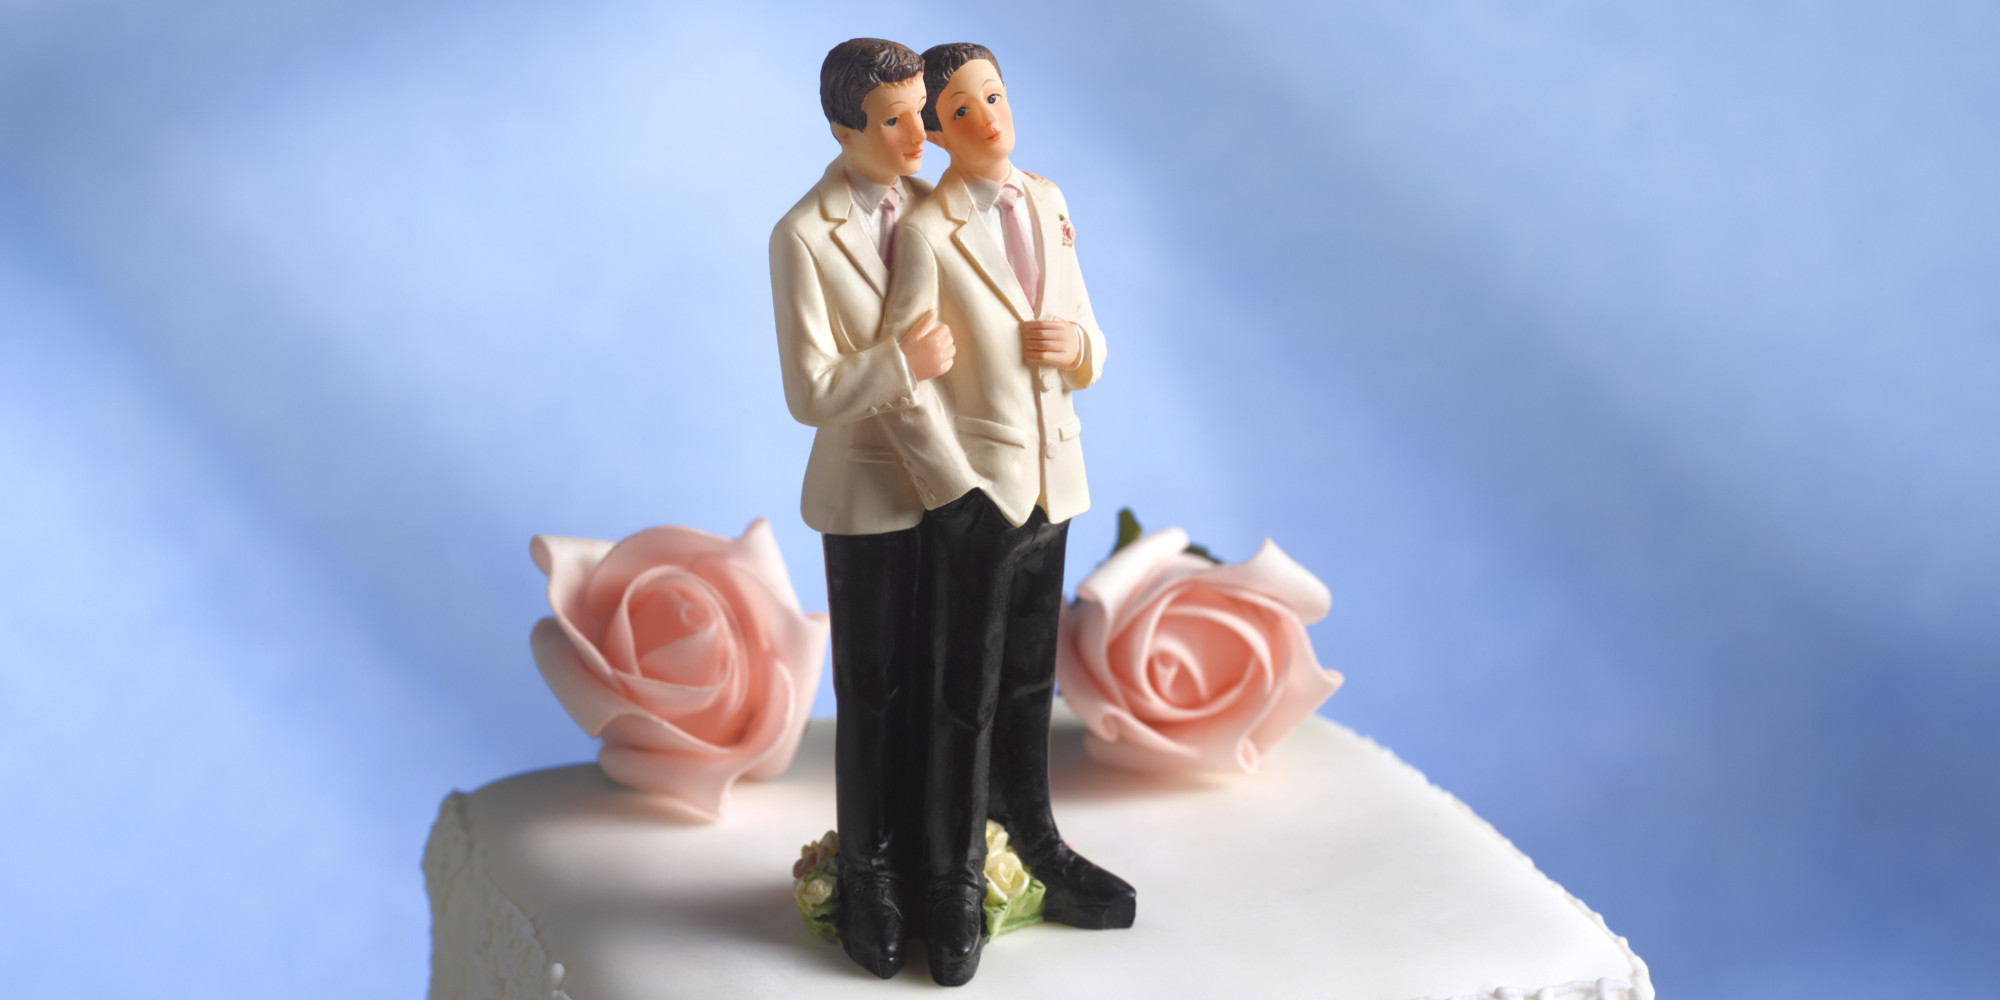 Wedding cake for gay marriage